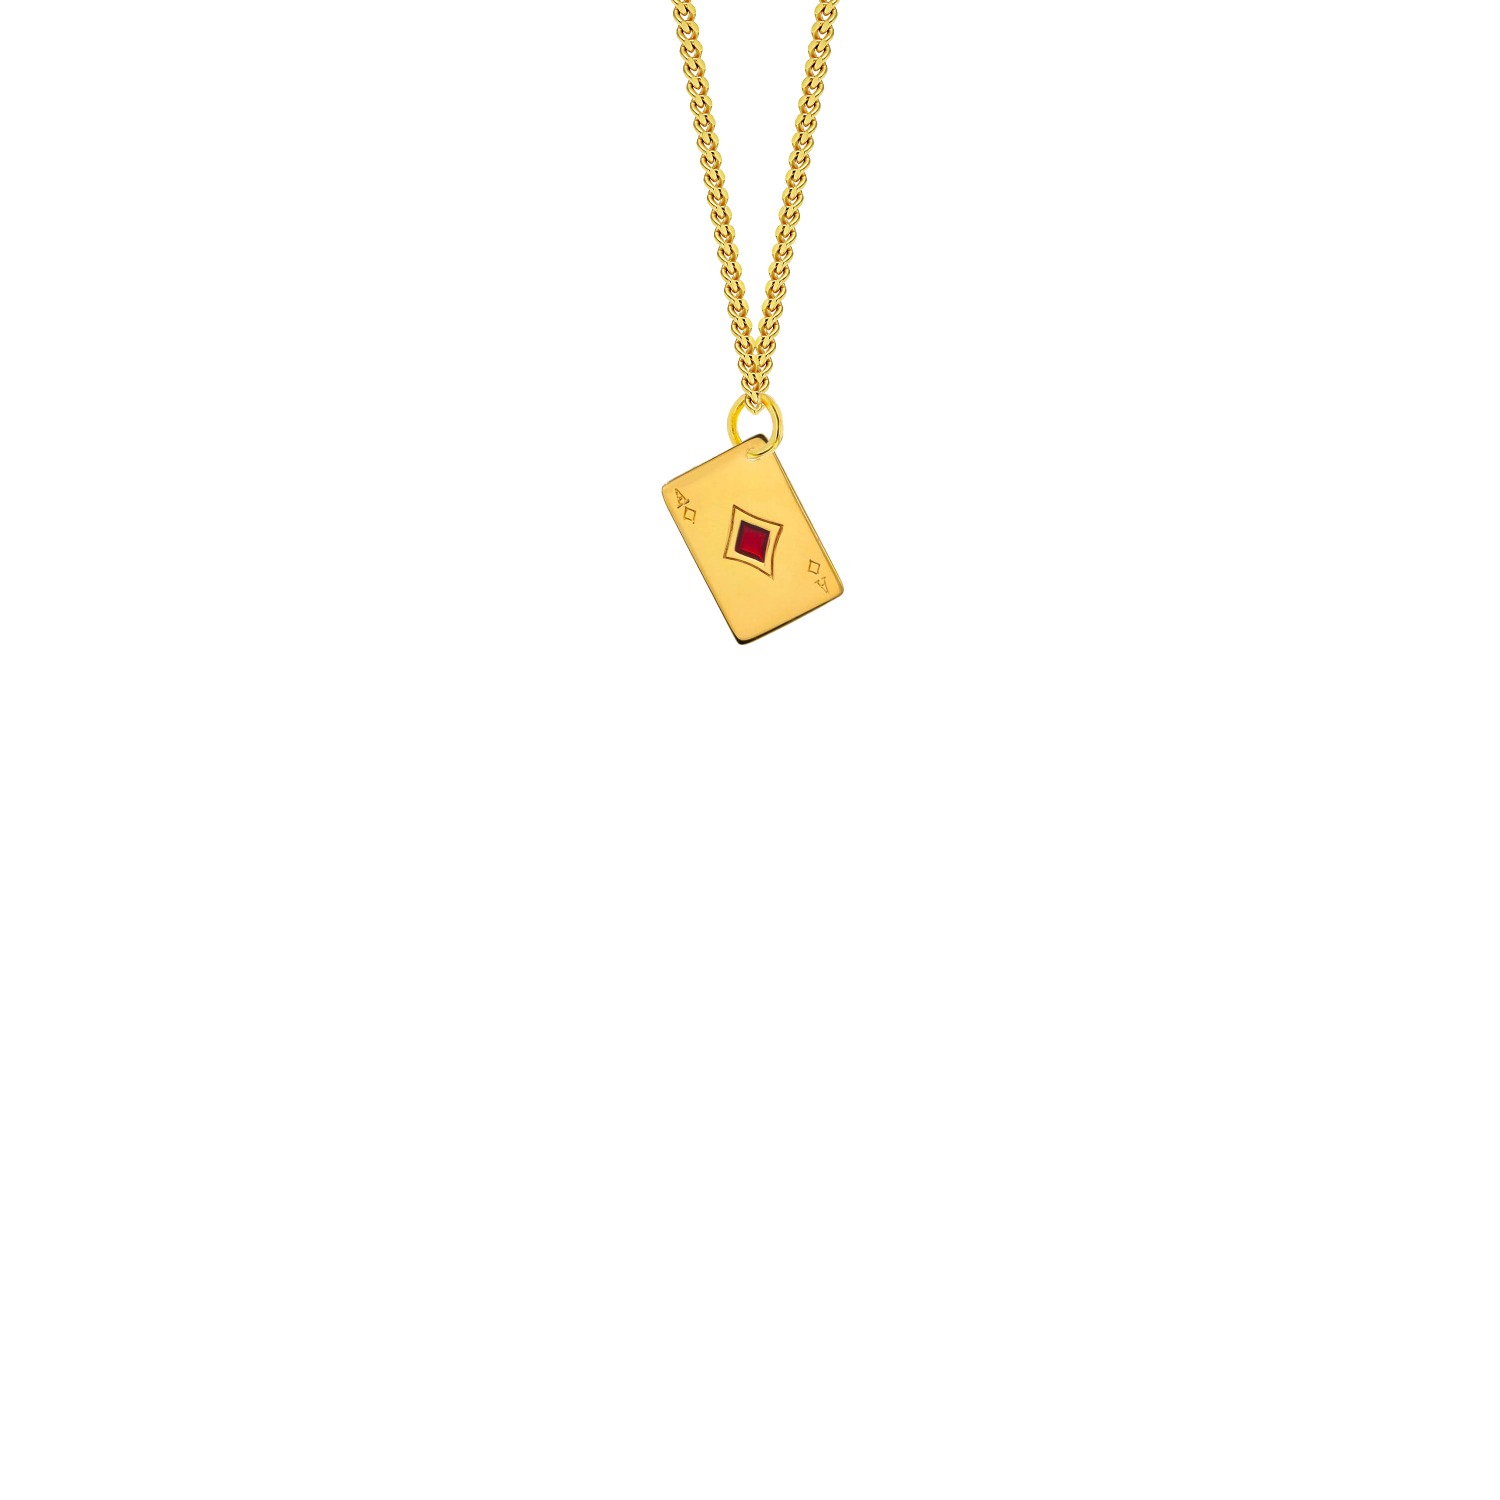 Men's Gold / Red Mini Ace Of Diamonds Playing Card Pendant 18Kt Gold Plated & Red Enamel True Rocks